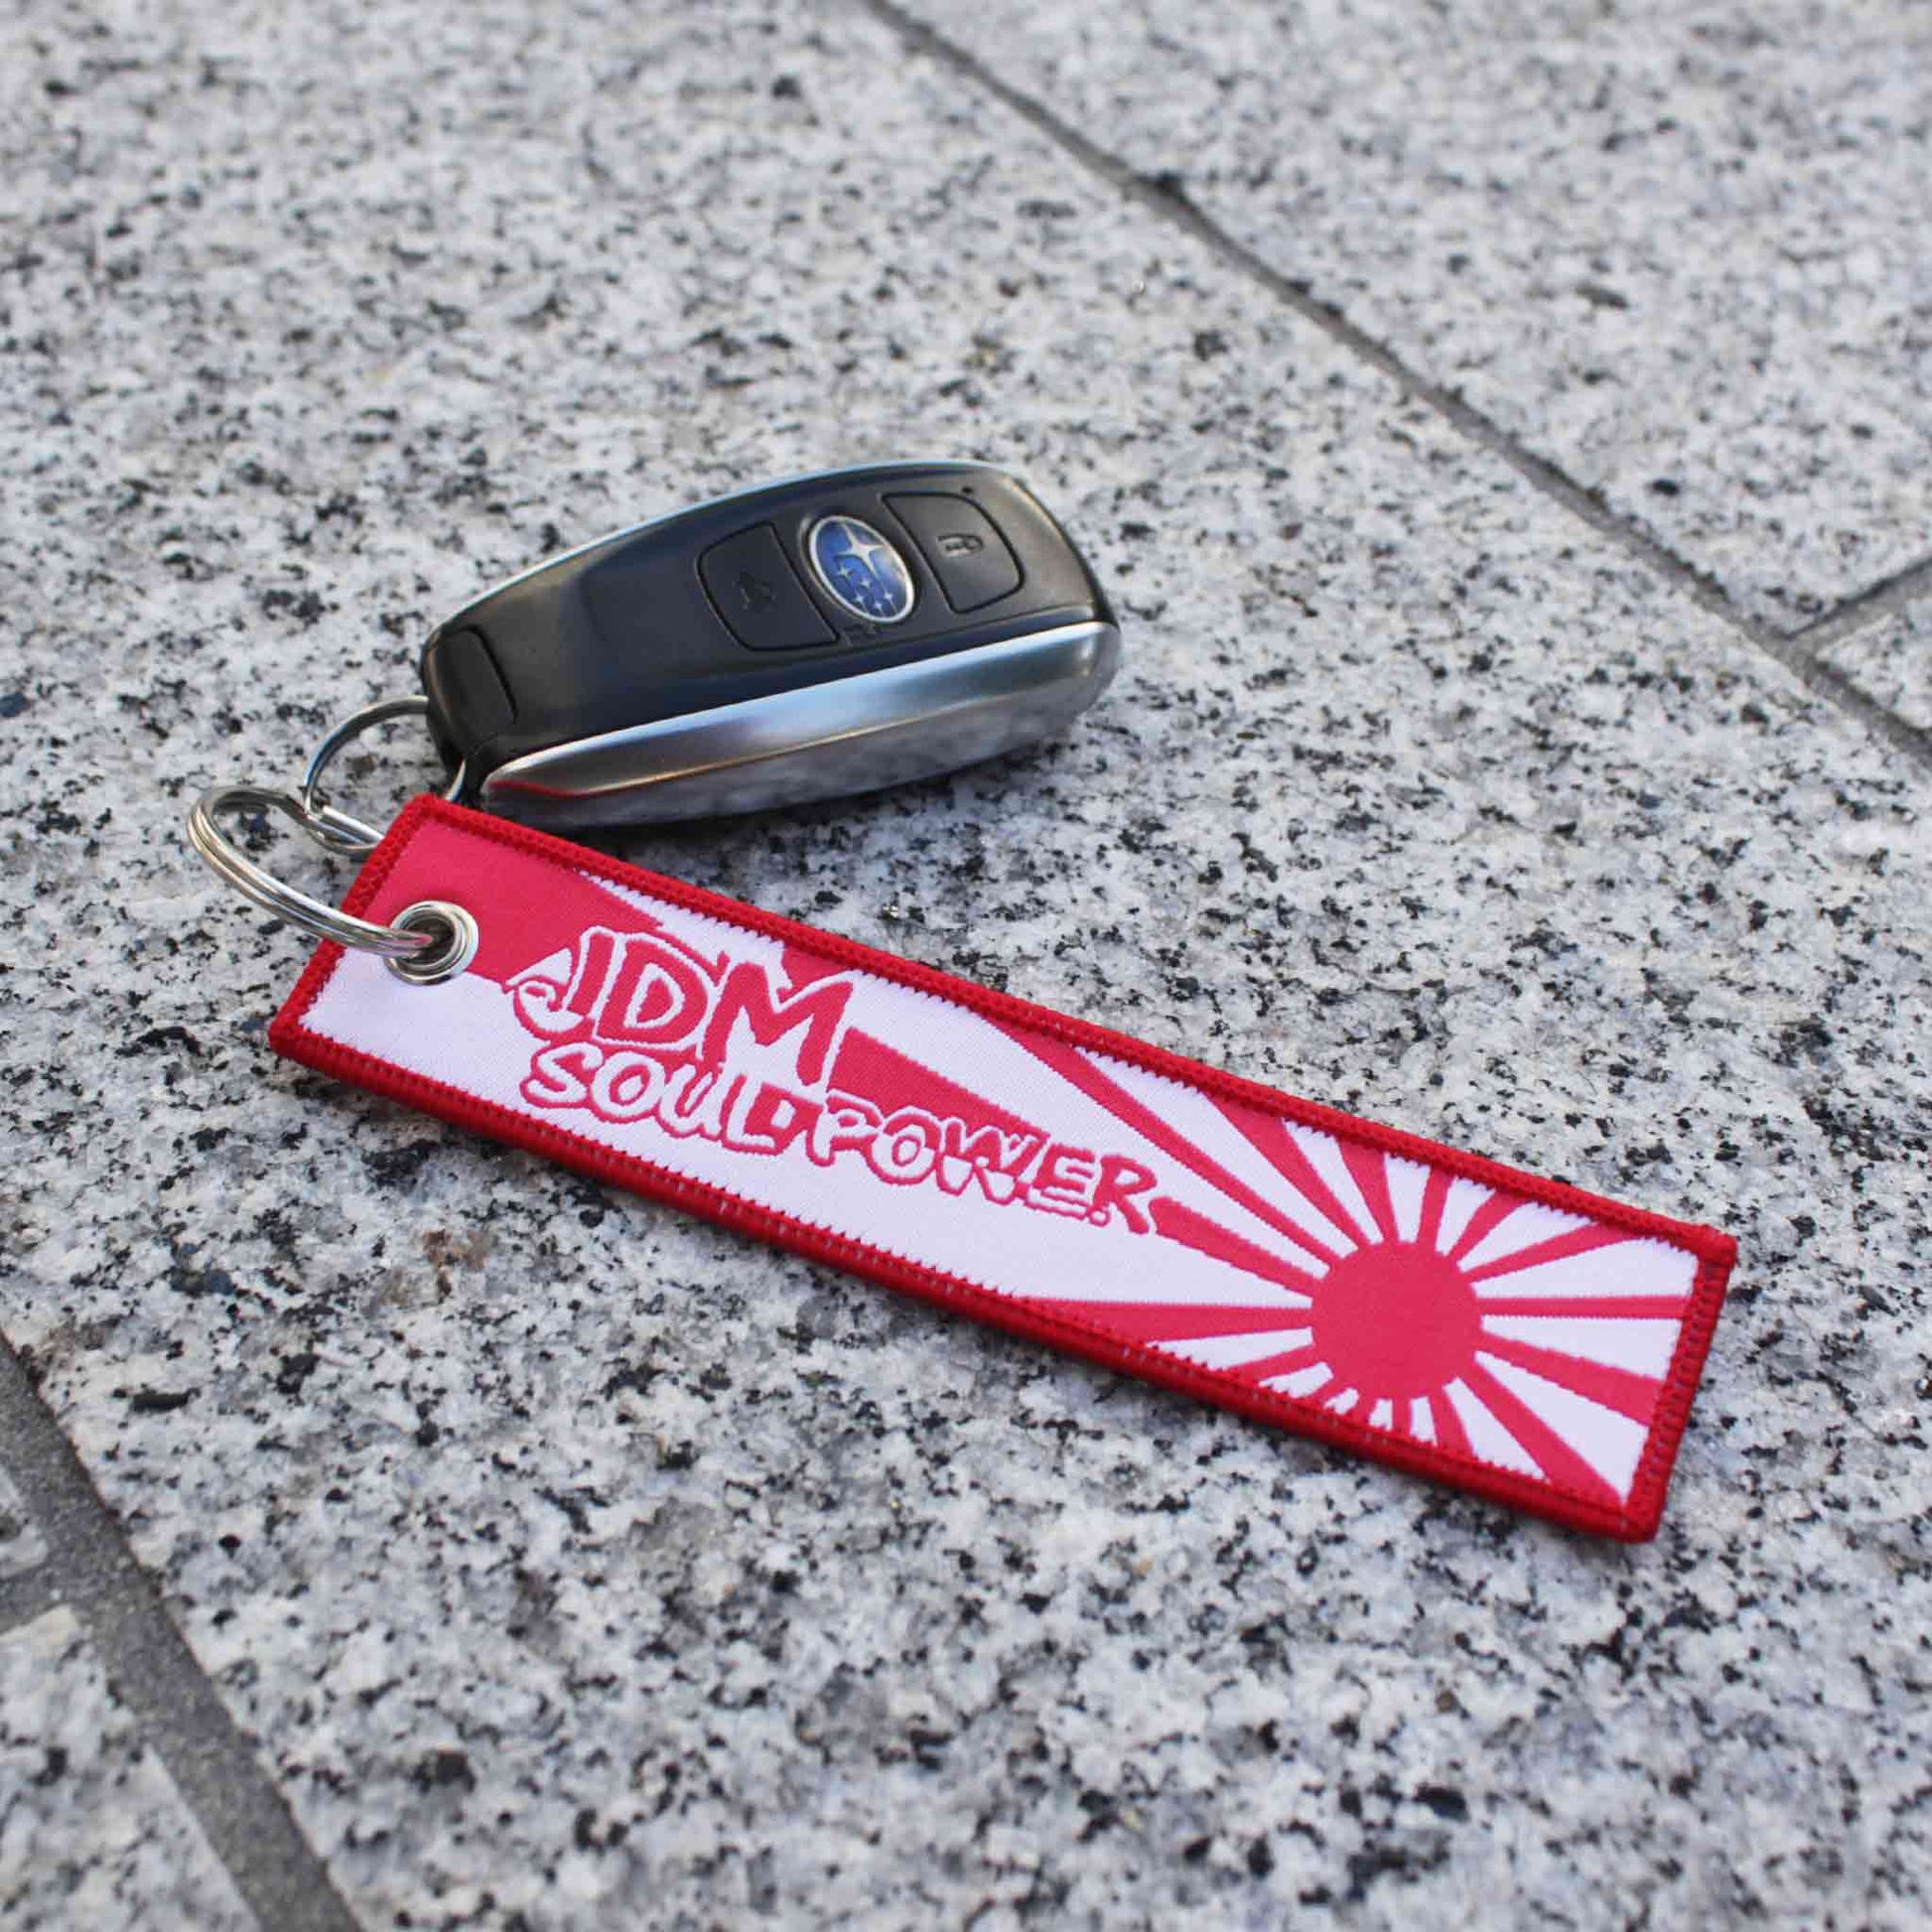 A red and white JDM soul power jet tag holding a Subaru car key on a marble floor